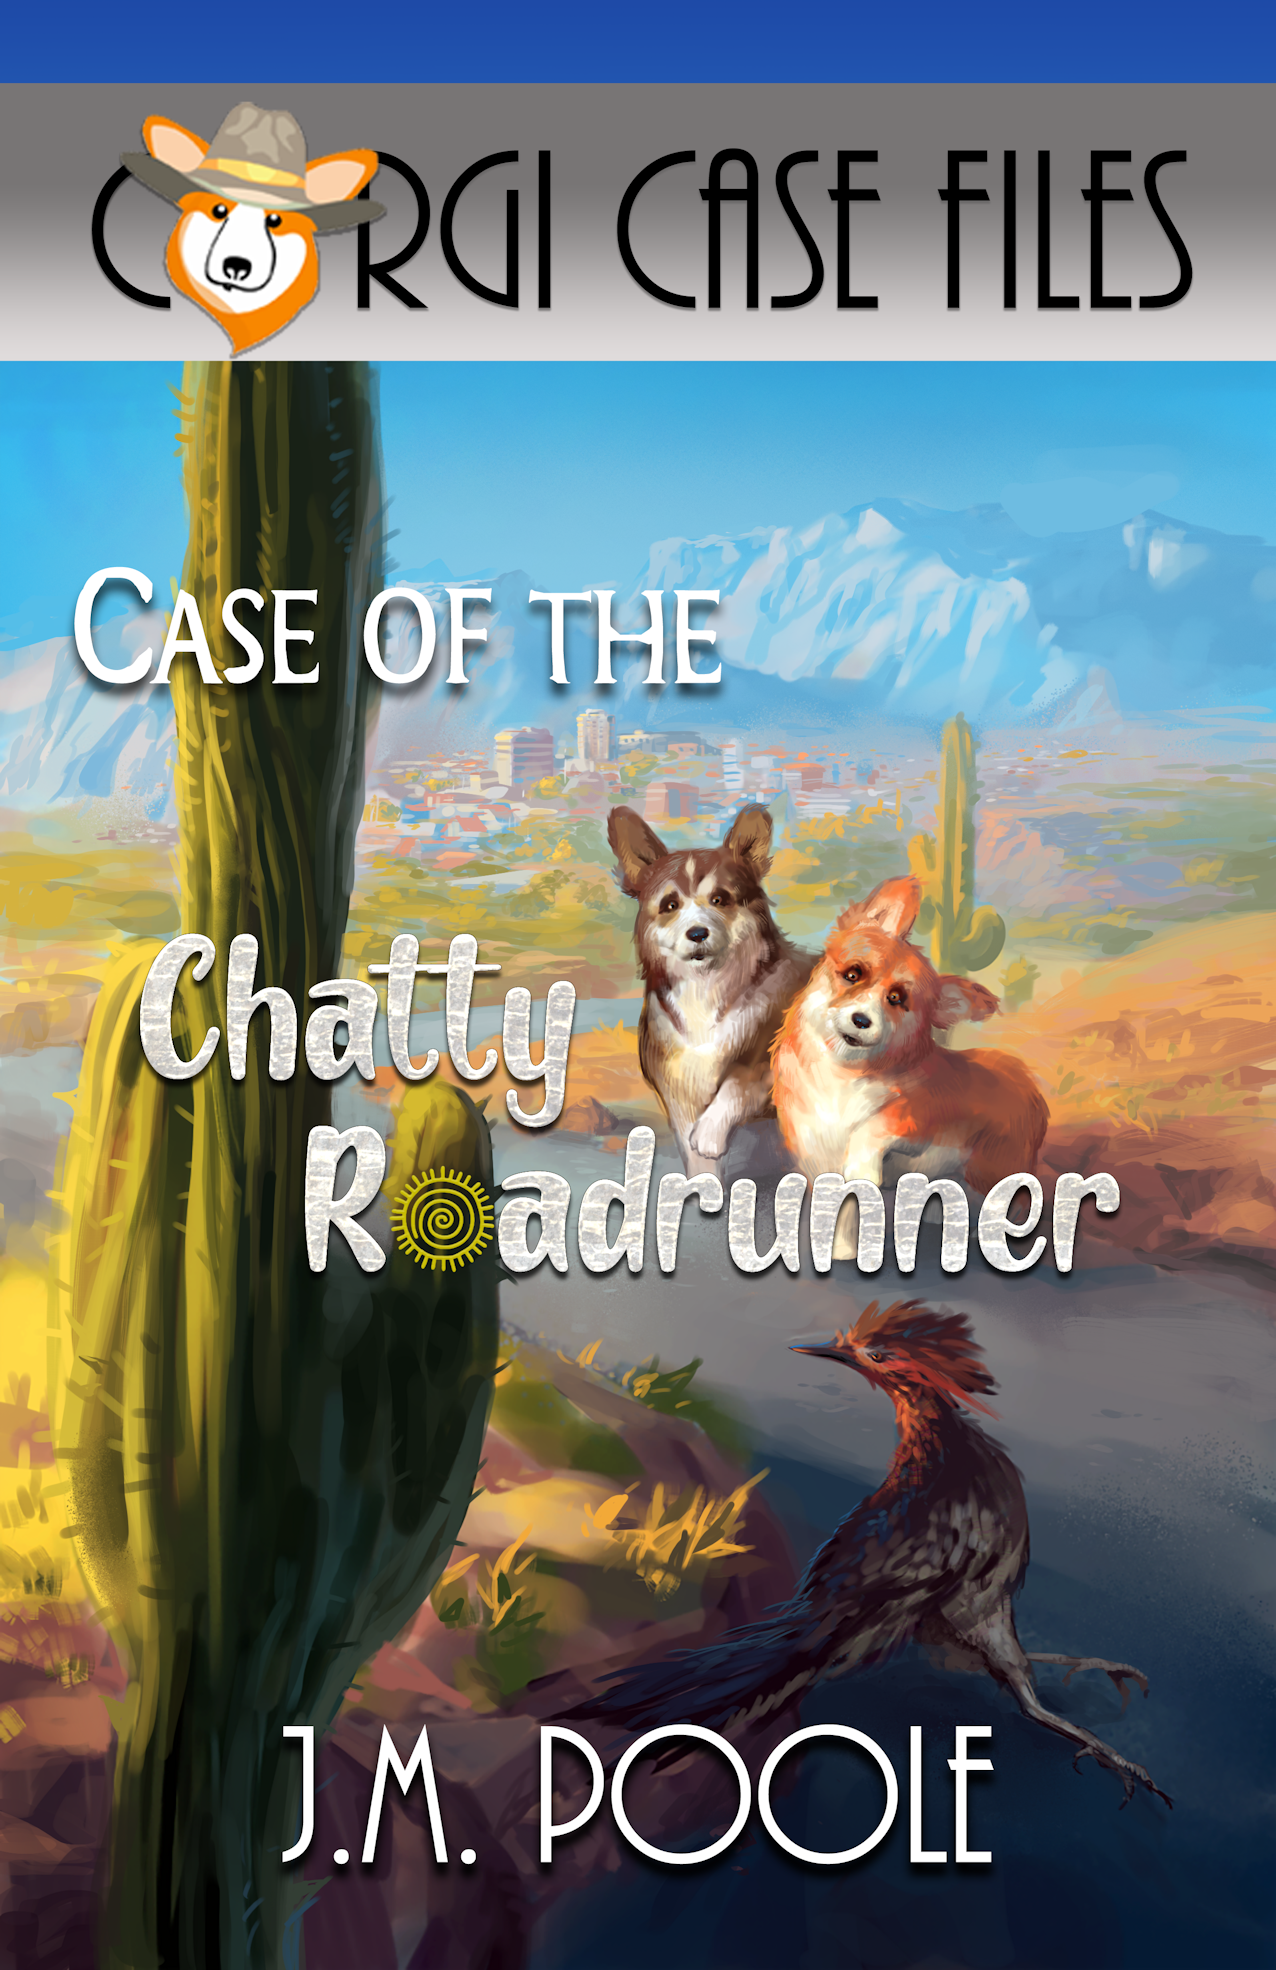 Case of the Chatty Roadrunner